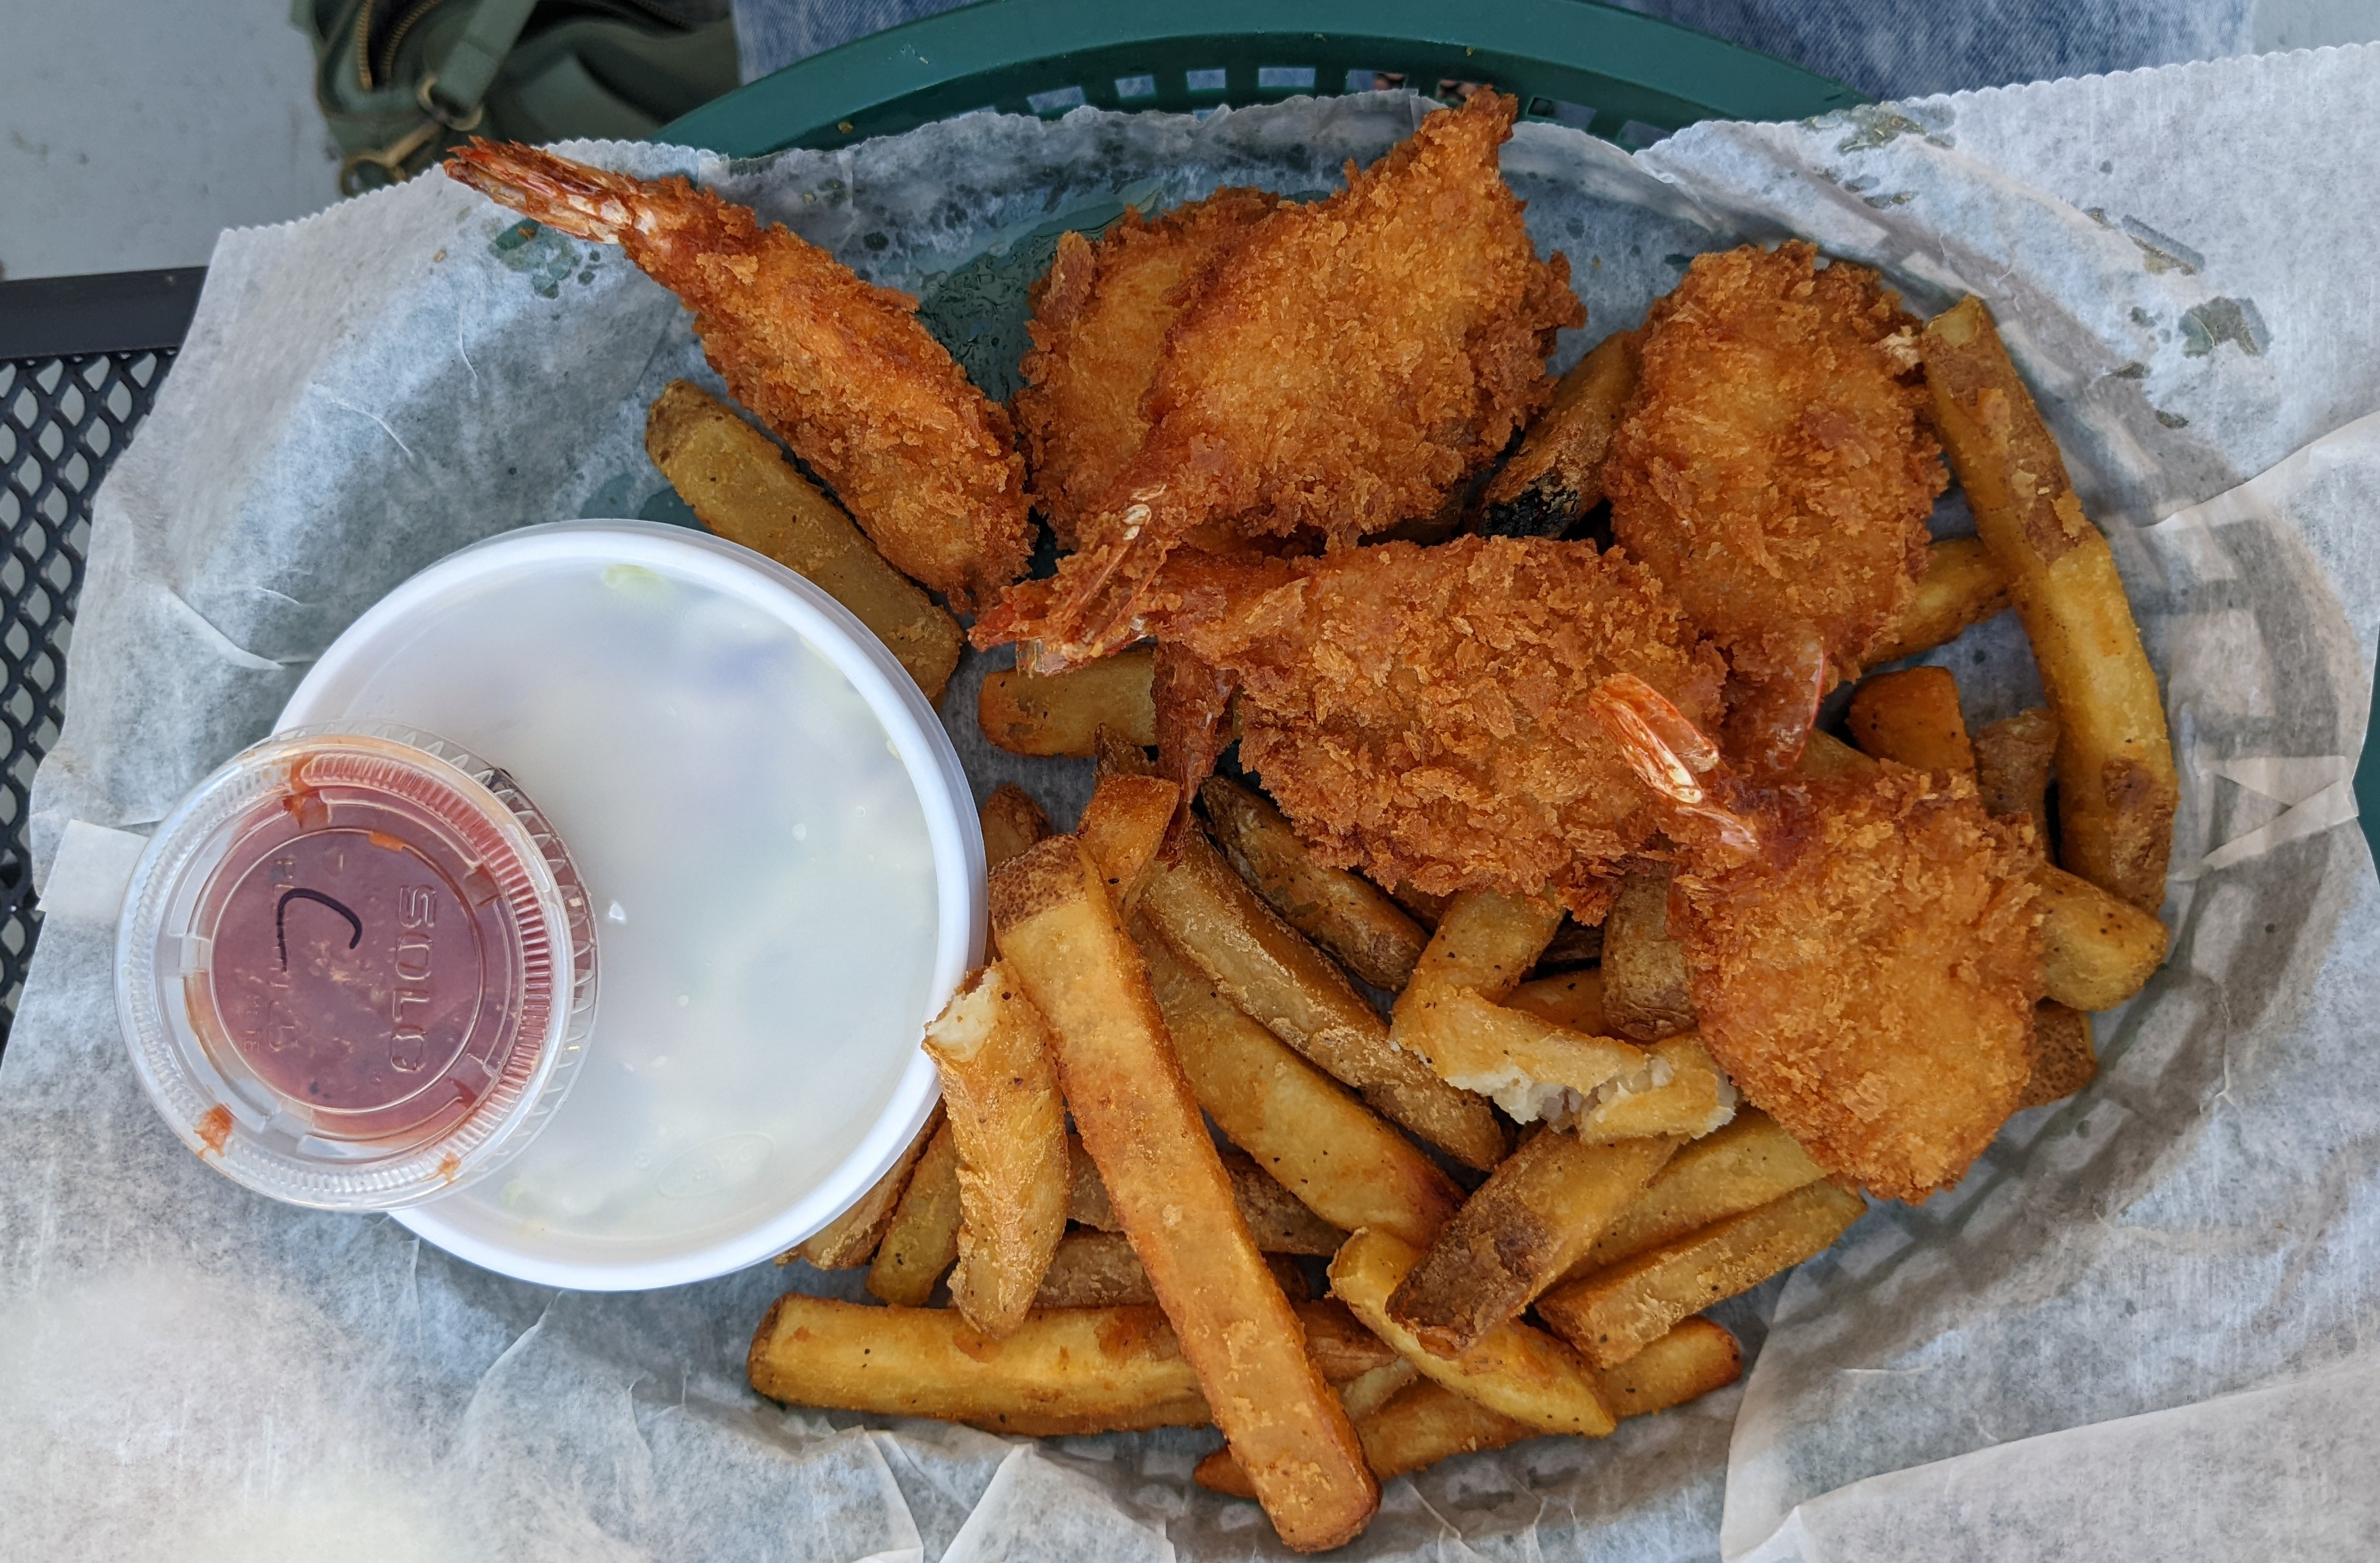 An overhead photo shows the fried shrimp basket from Bunny's with six jumbo fried shrimp, fries, coleslaw in a white styrofoam cup, and a little cup of sauce. Photo by Tayler Neumann.